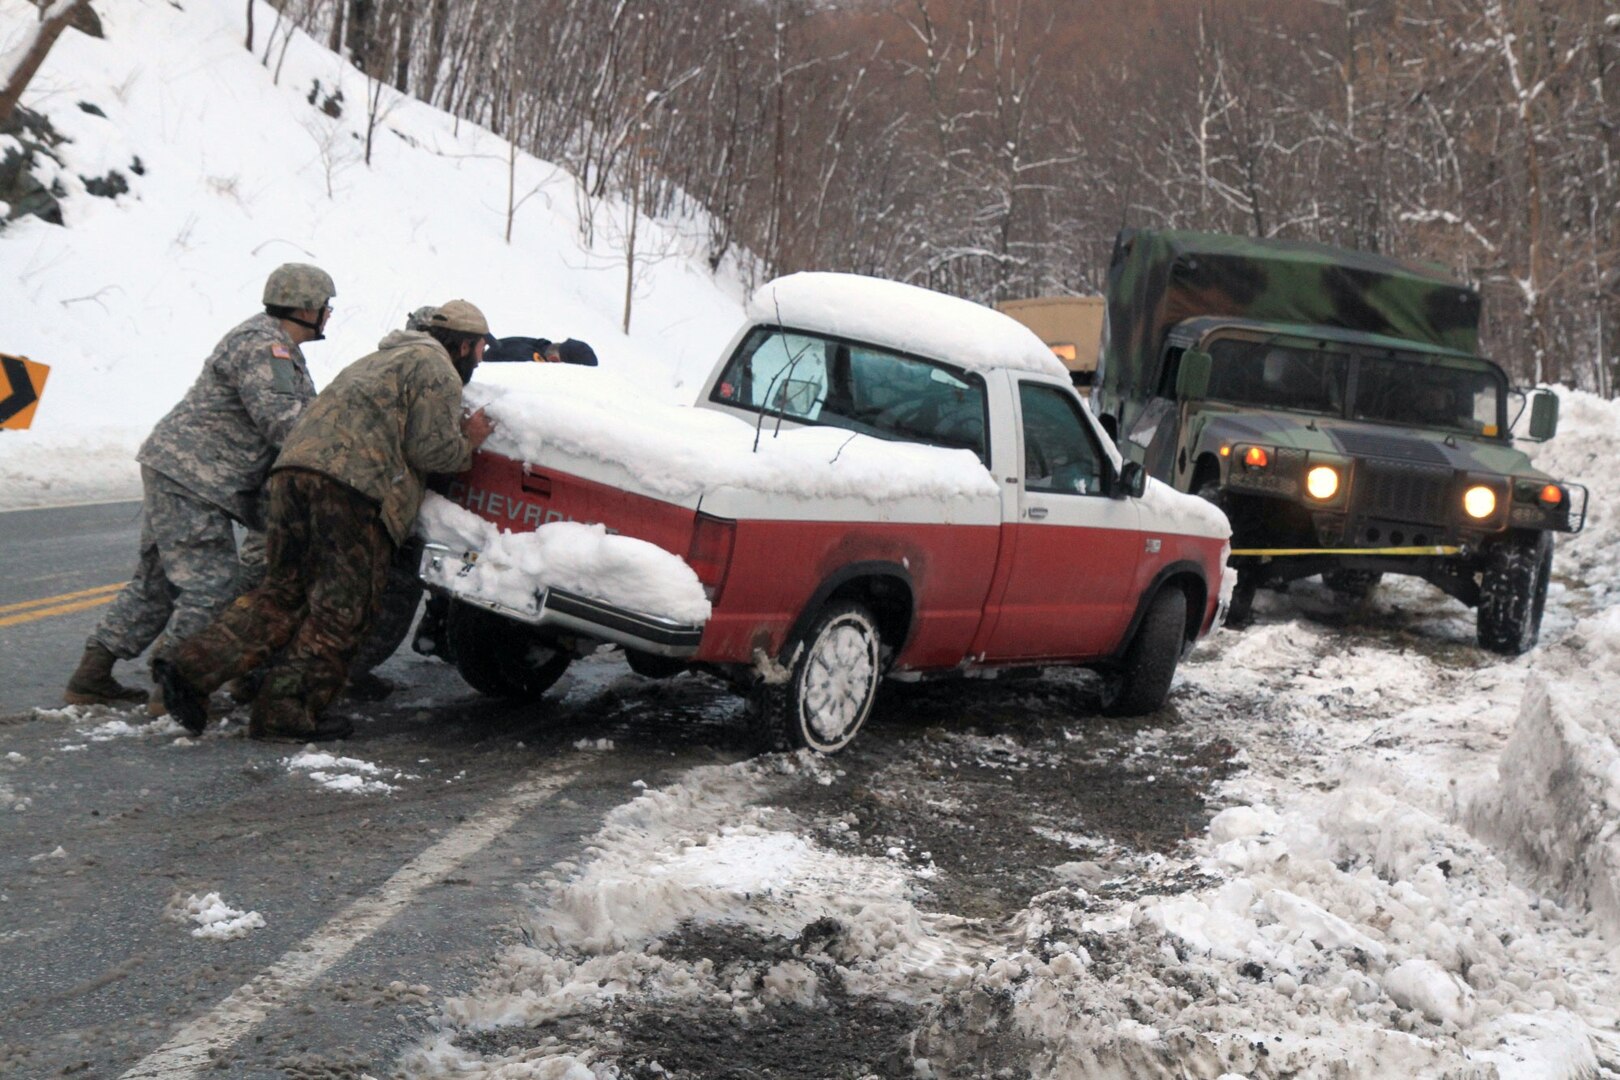 Soldiers from the Charlottesville-based Company C, 429th Brigade Support Battalion, 116th Infantry Brigade Combat Team work with Virginia officials to clear an abandoned vehicle March 6, 2013, near Nellysford, Va.